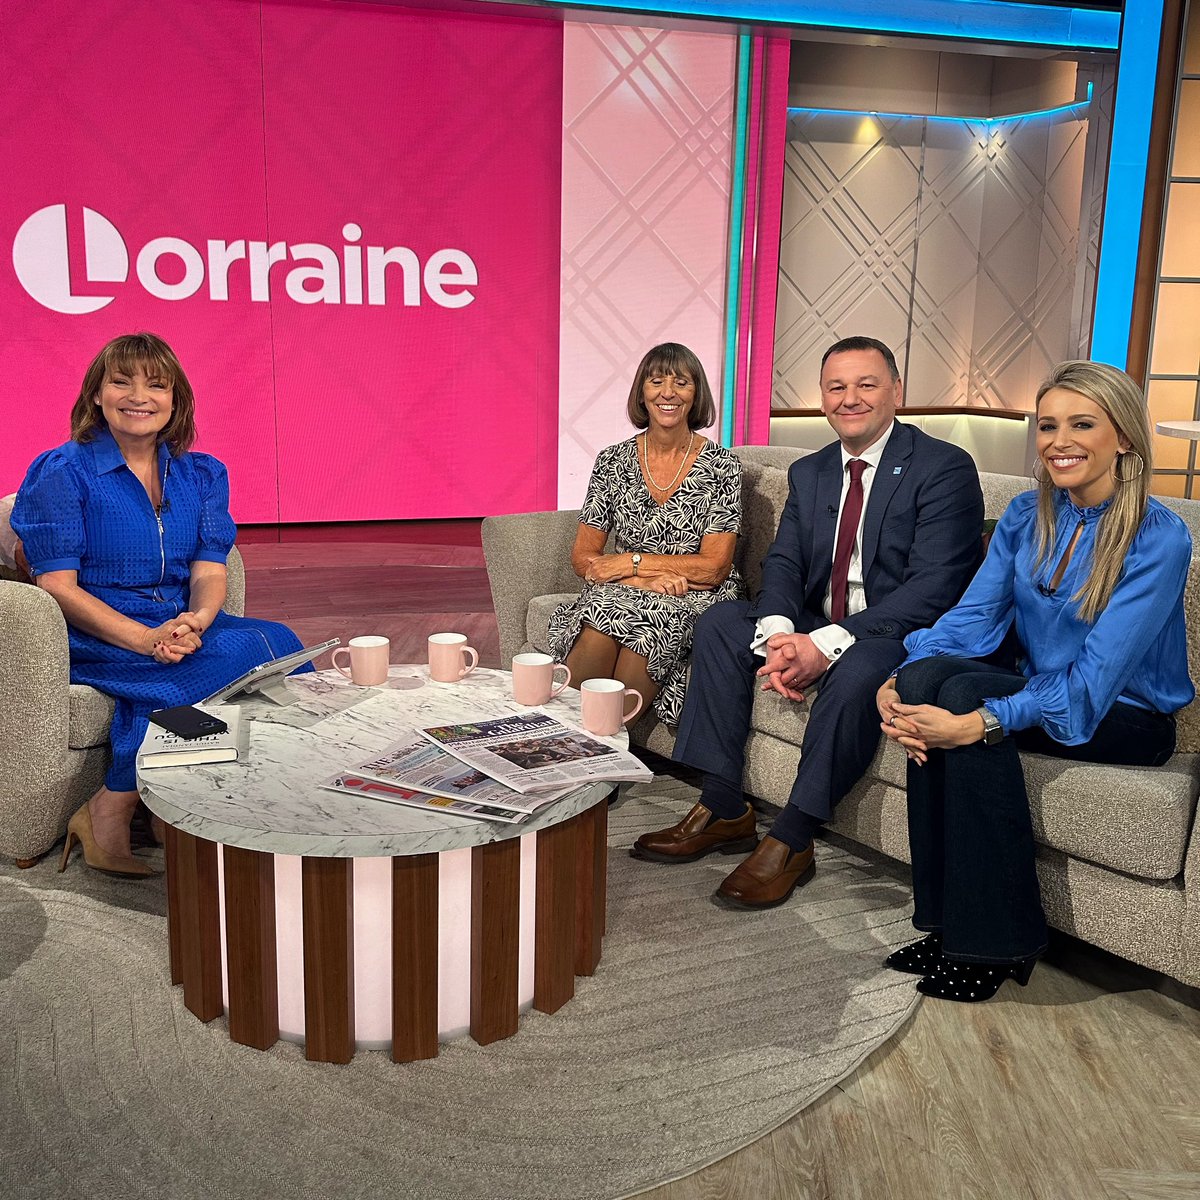 Sometimes it’s important to remember what we built AI for. So much talk of risk and worry, but AI in healthcare is bringing phenomenal change. On @ITV @lorraine this morning we talked colon cancer diagnosis as part of the No Butts campaign.